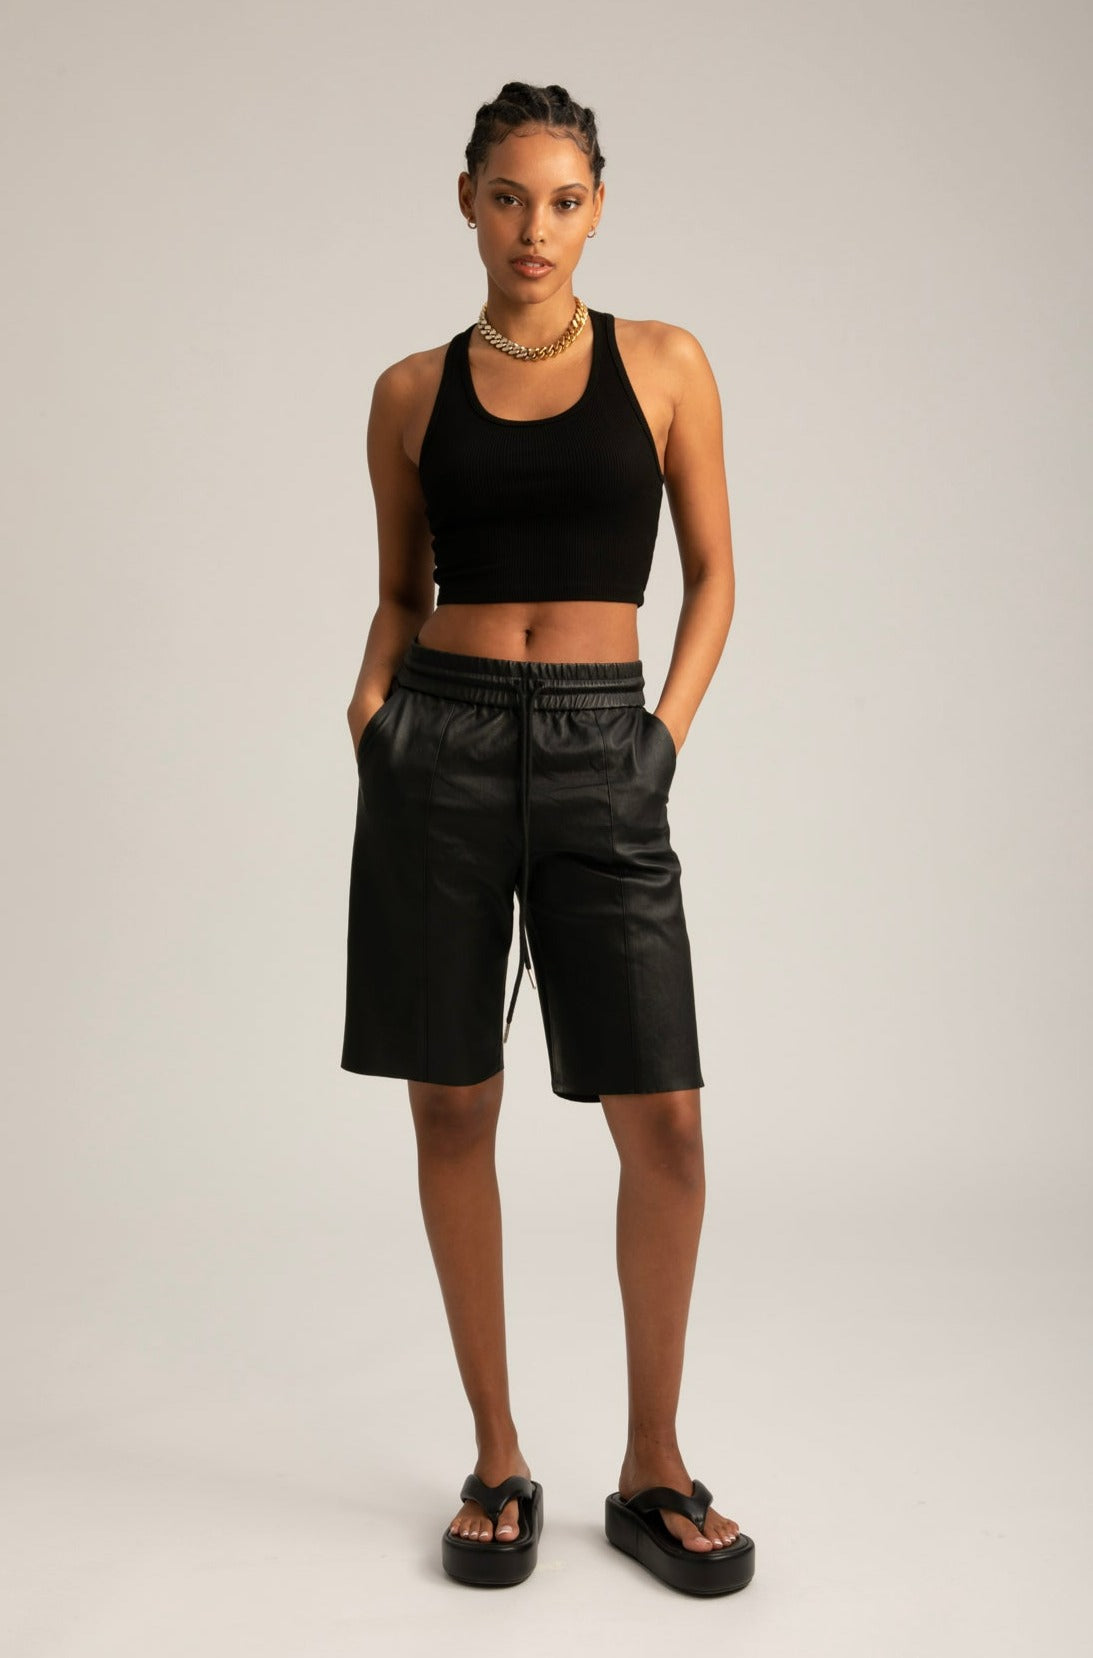 Black Leather All Star Shorts